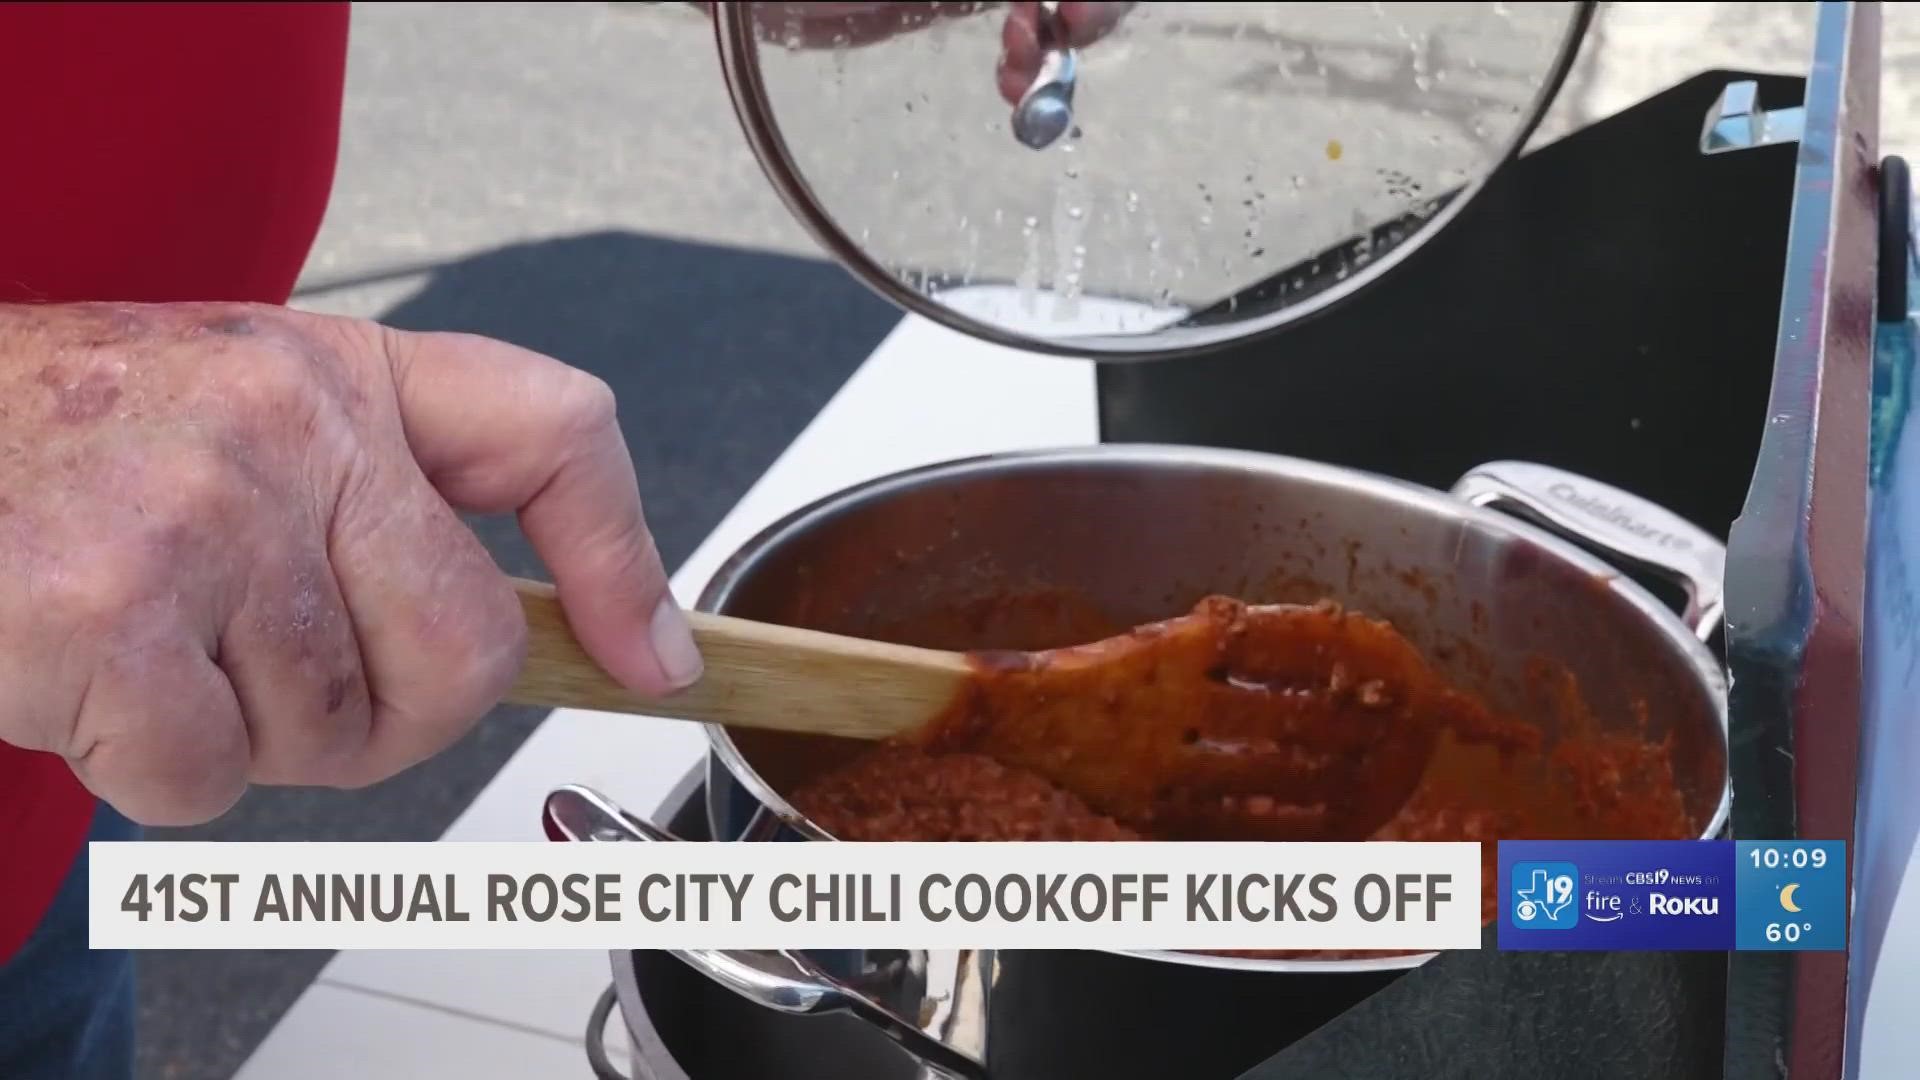 Over 20 cookers competed in the 41st annual Rose City Chili Cookoff this weekend.